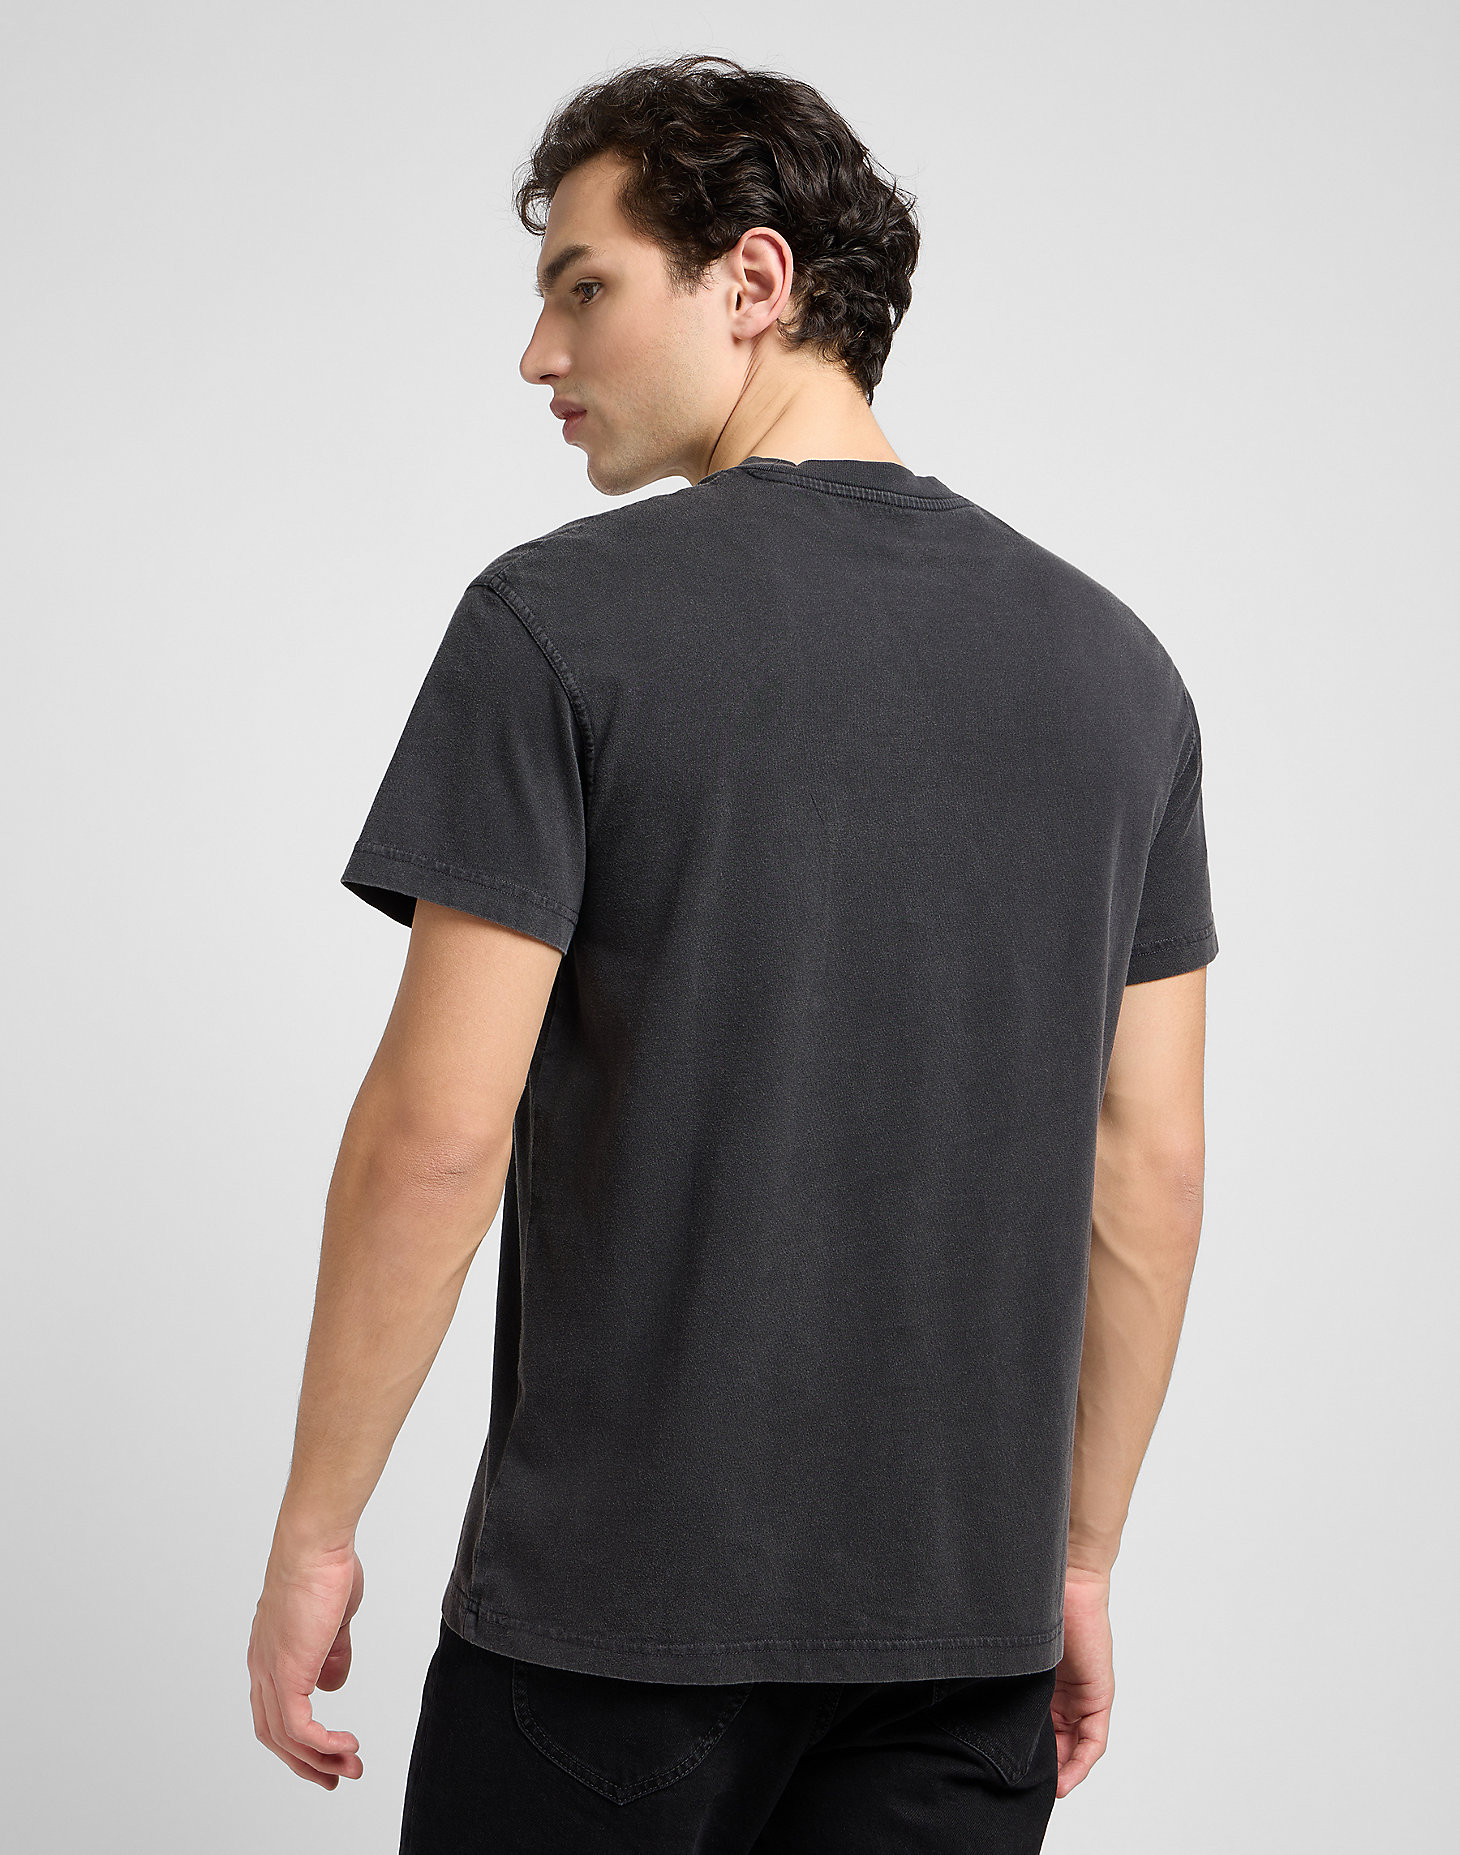 Relaxed Pocket Tee in Washed Black alternative view 1